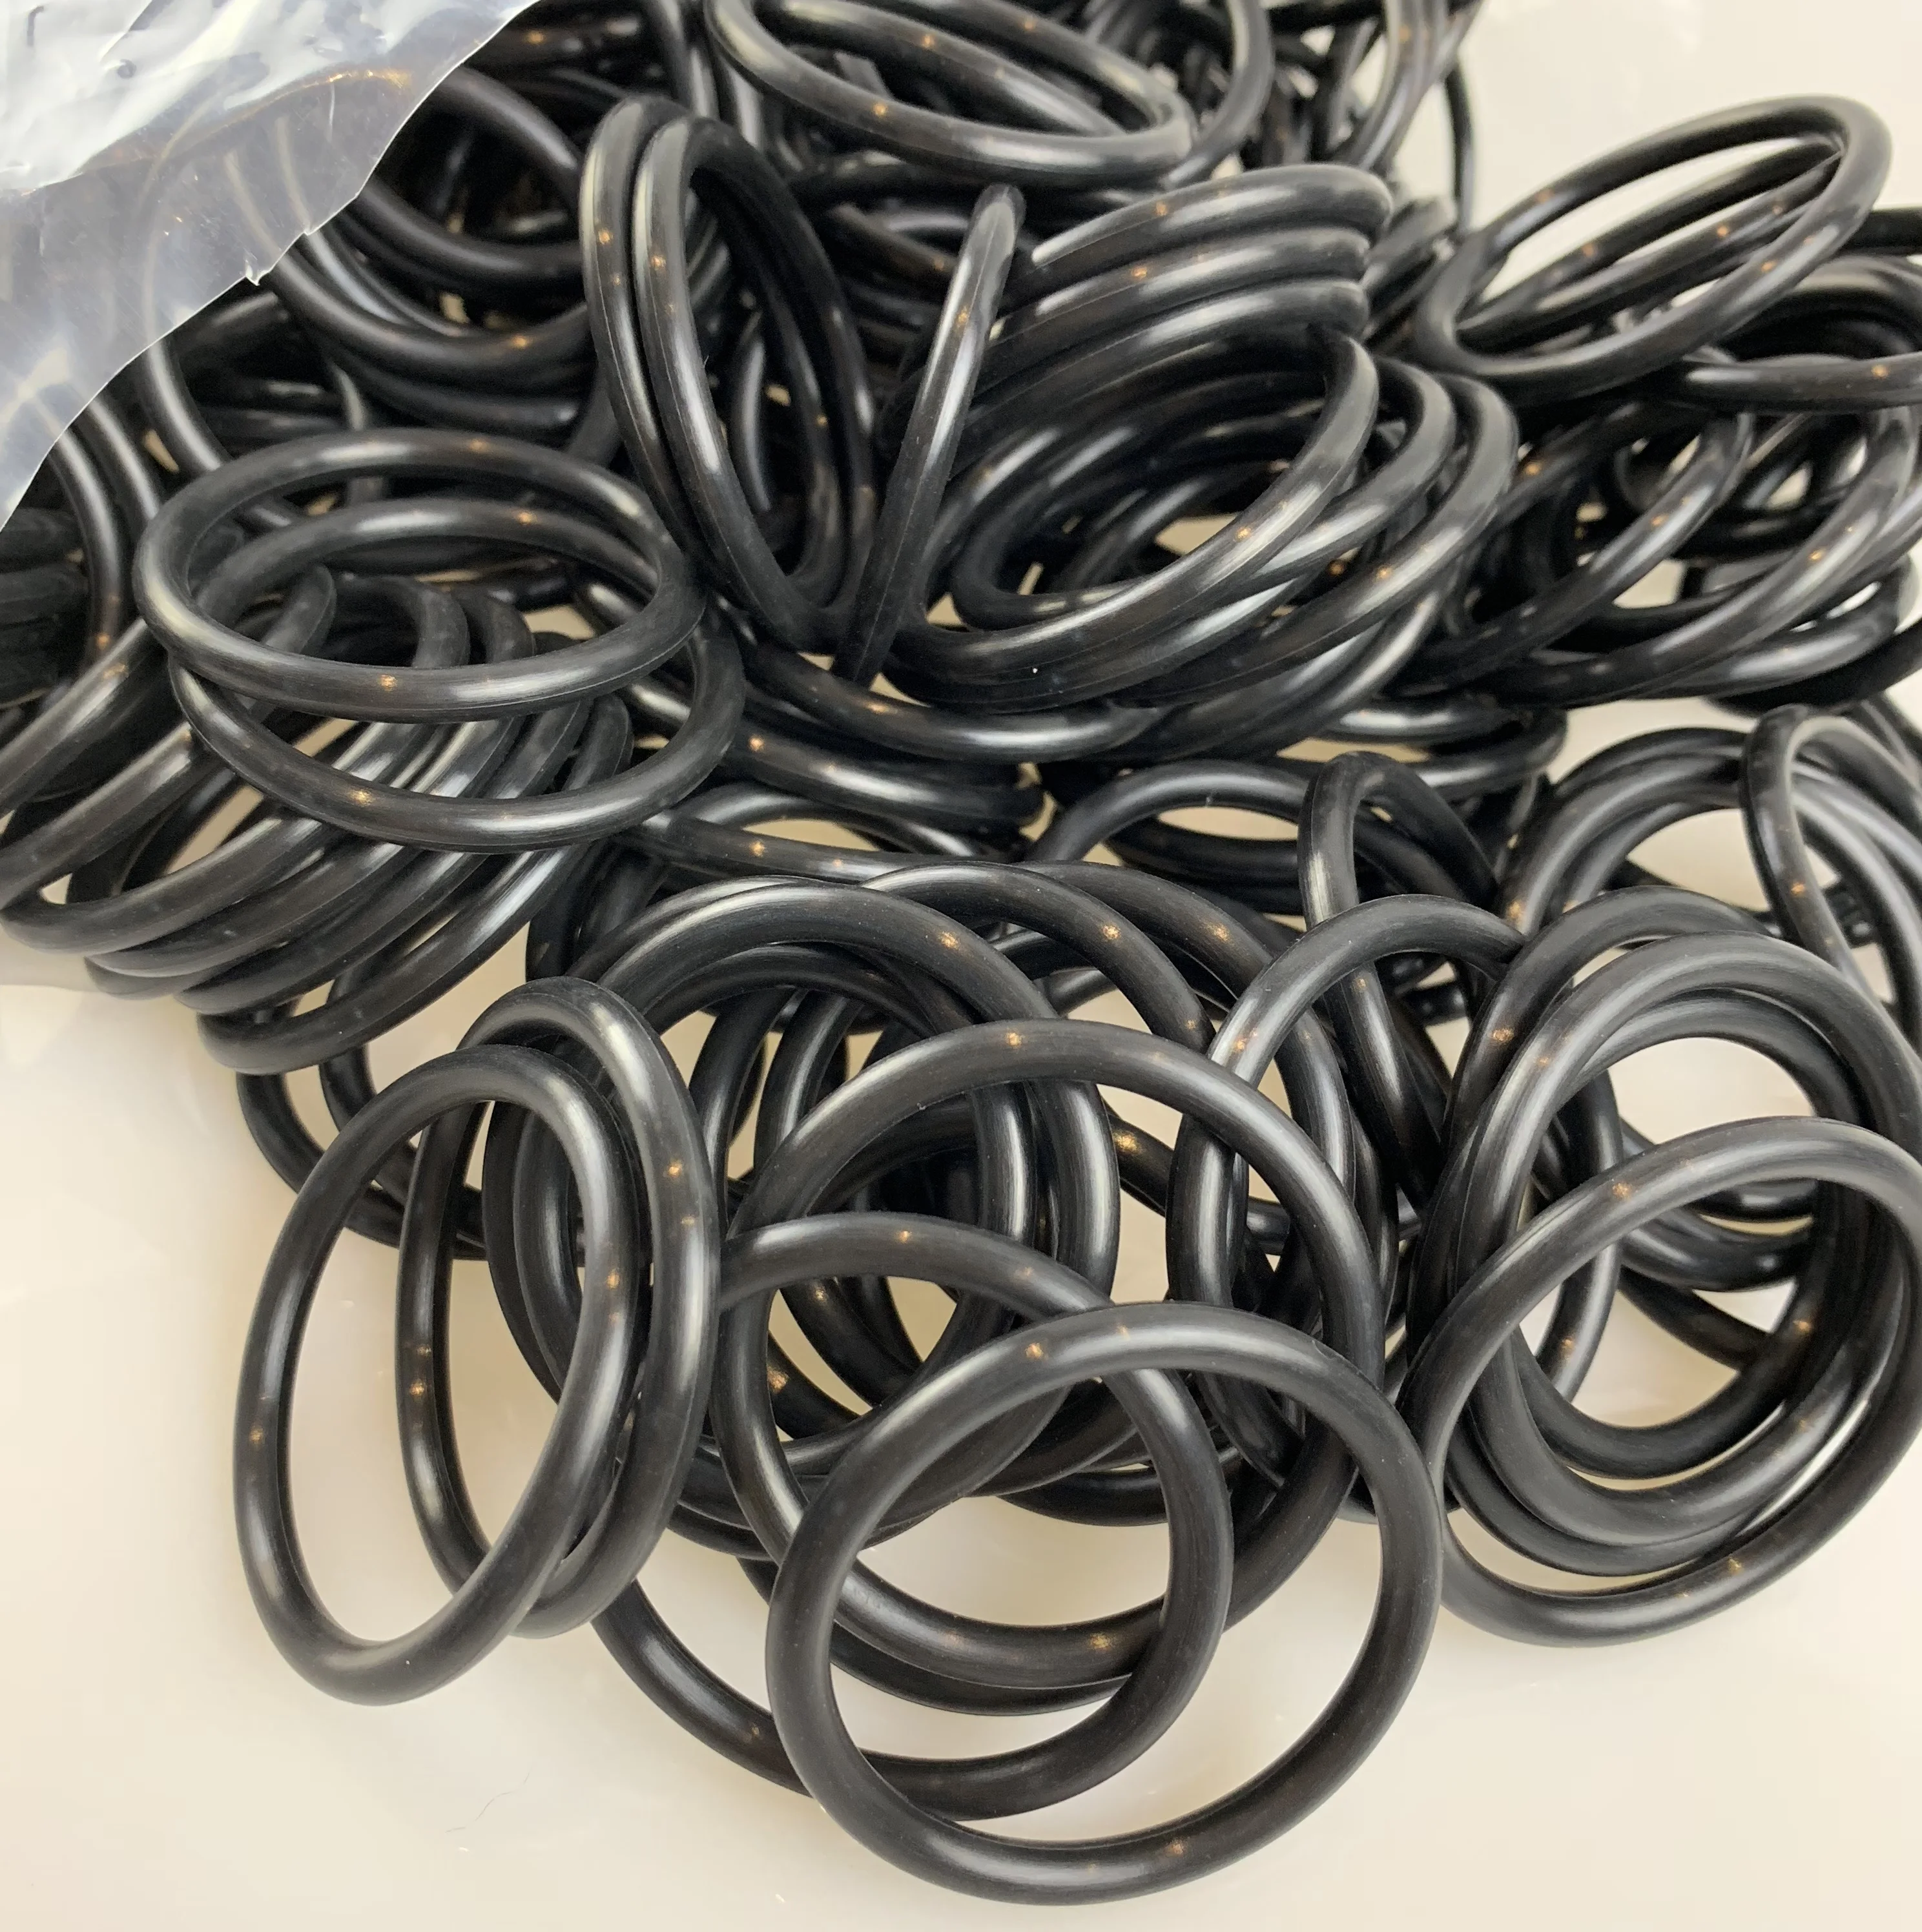 
new products free samples rubber o rings rubber_o_rings free samples rubber o rings 